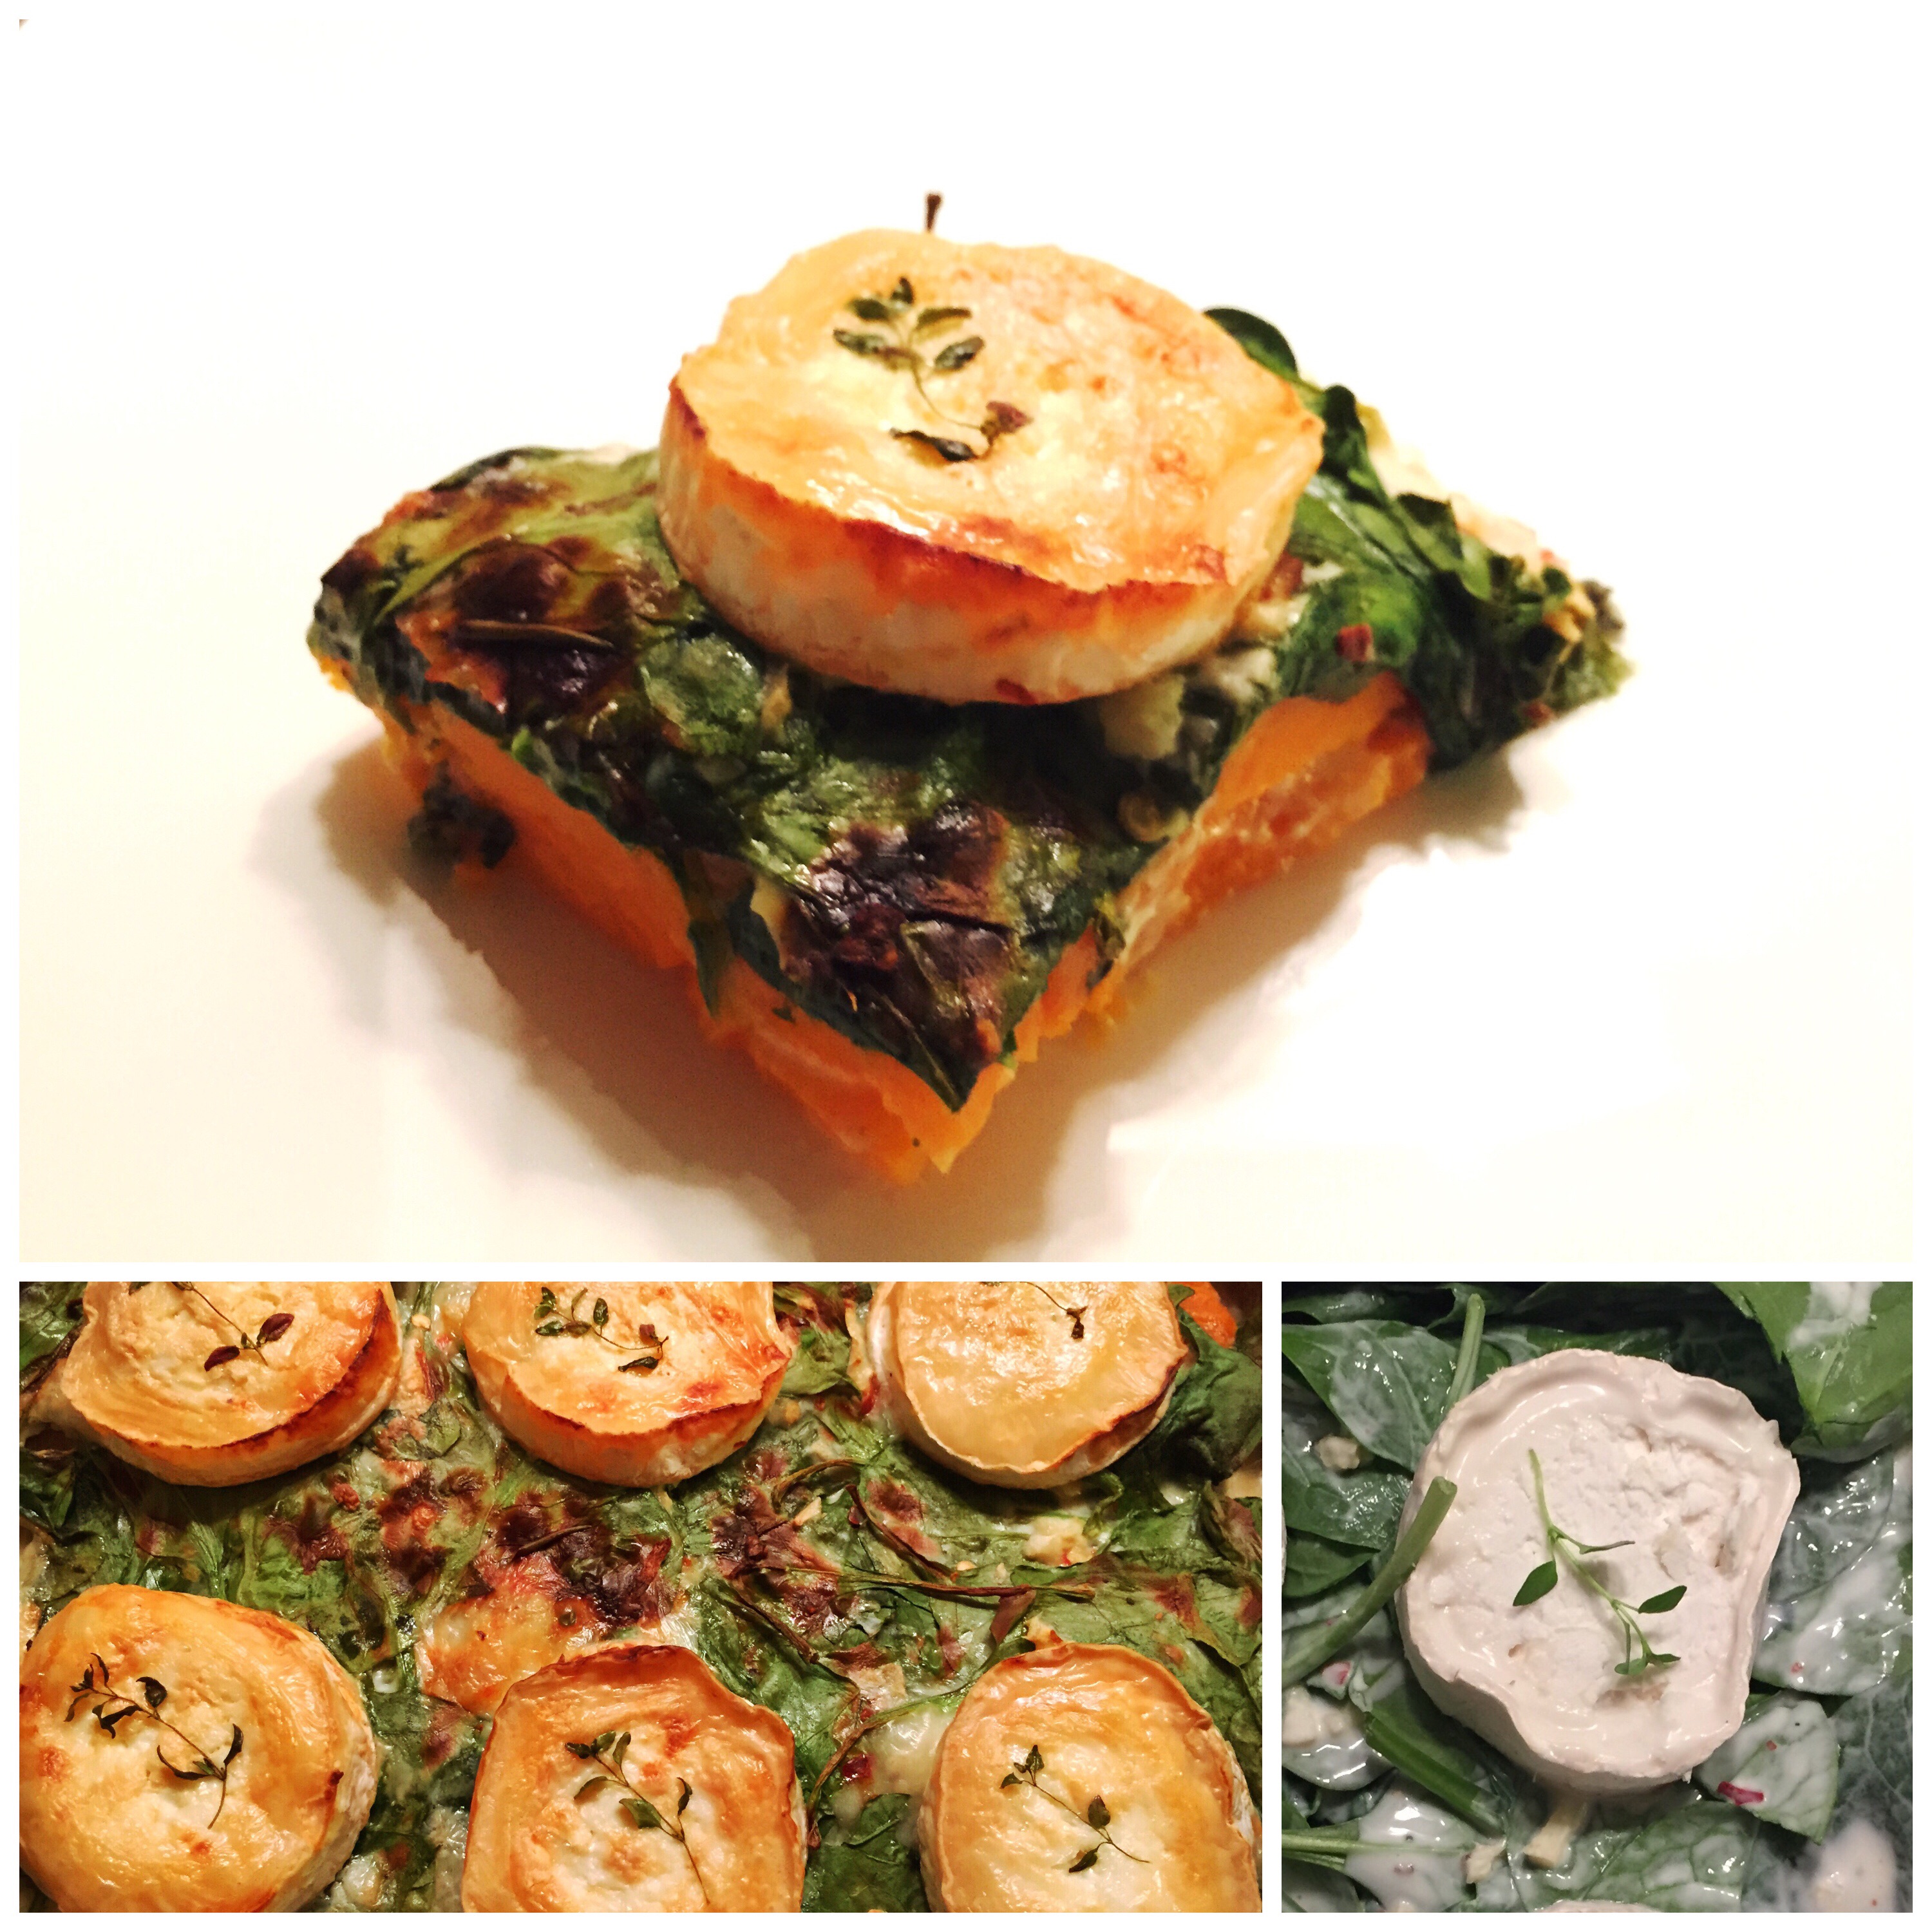 SWEET POTATO SPINACH GRATIN WITH GRILLED GOAT CHEESE